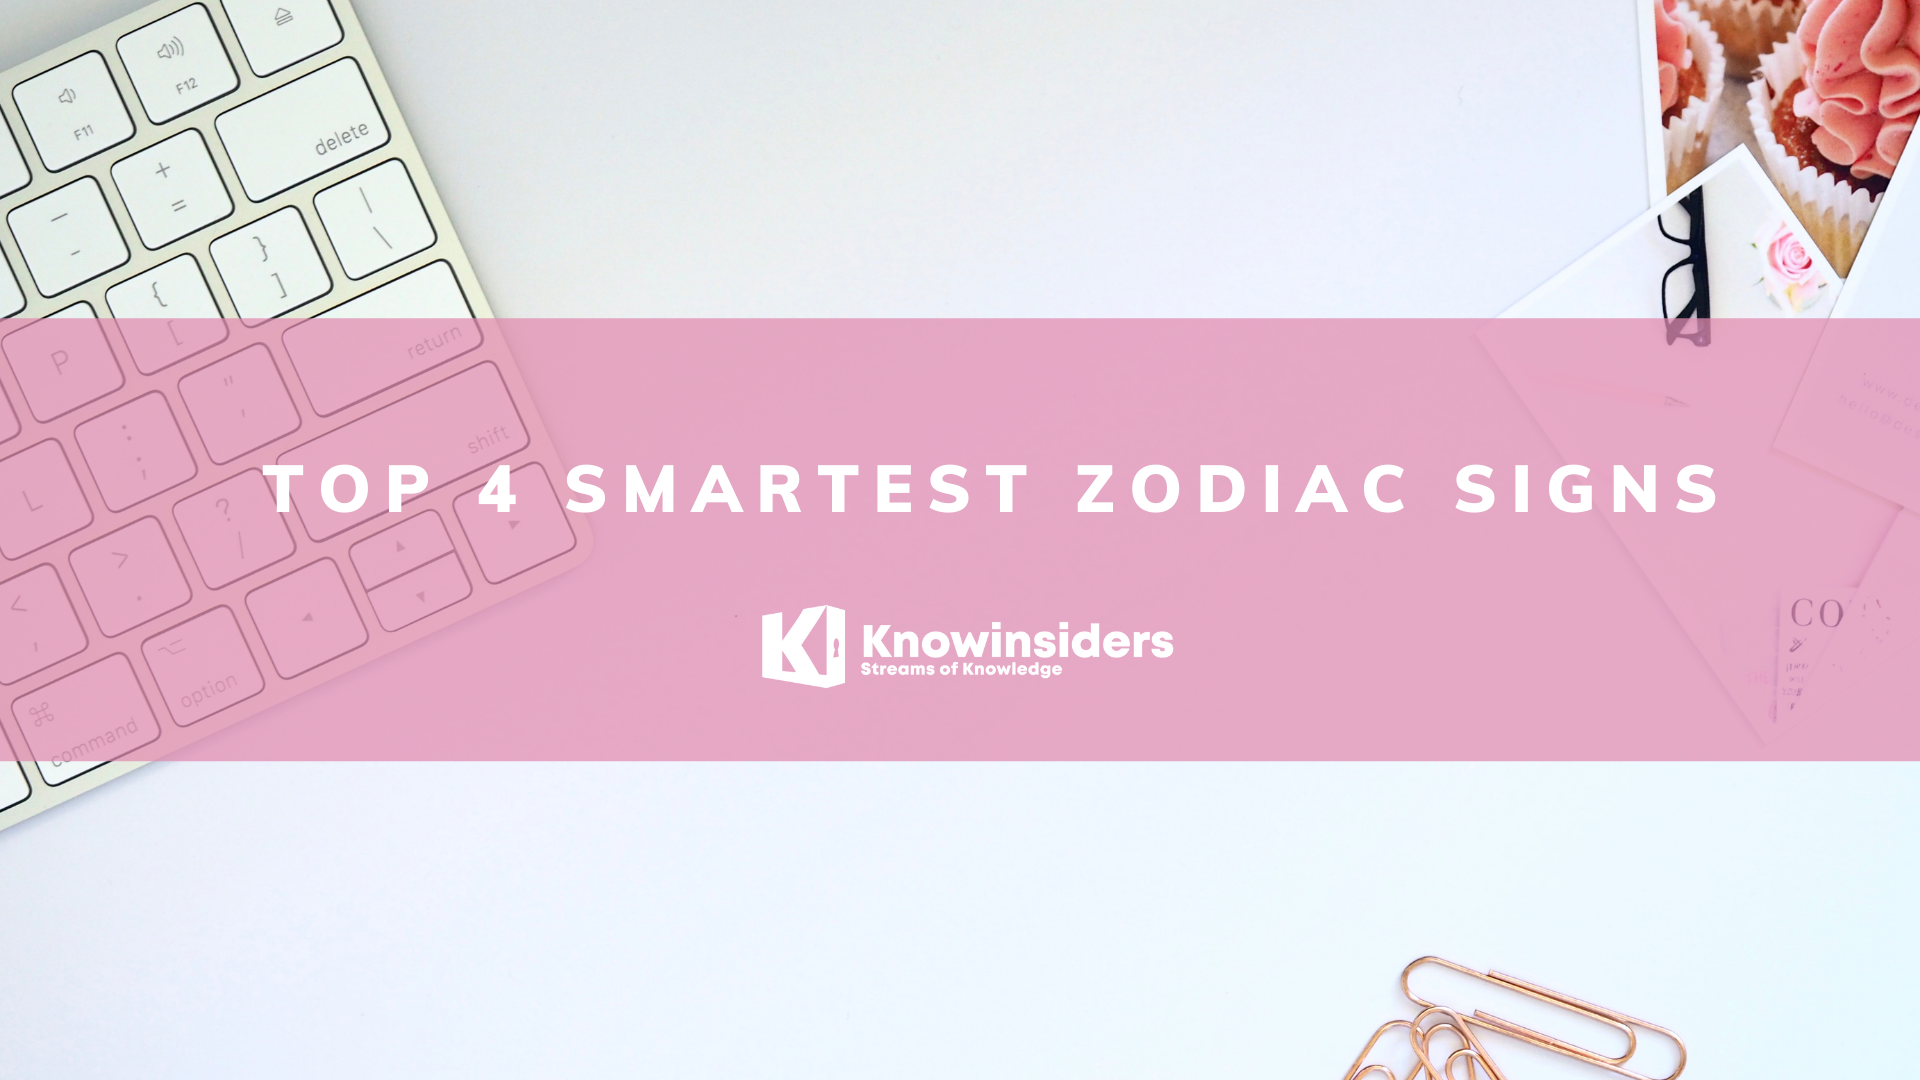 Top 4 Smartest Zodiac Signs According To Astrology